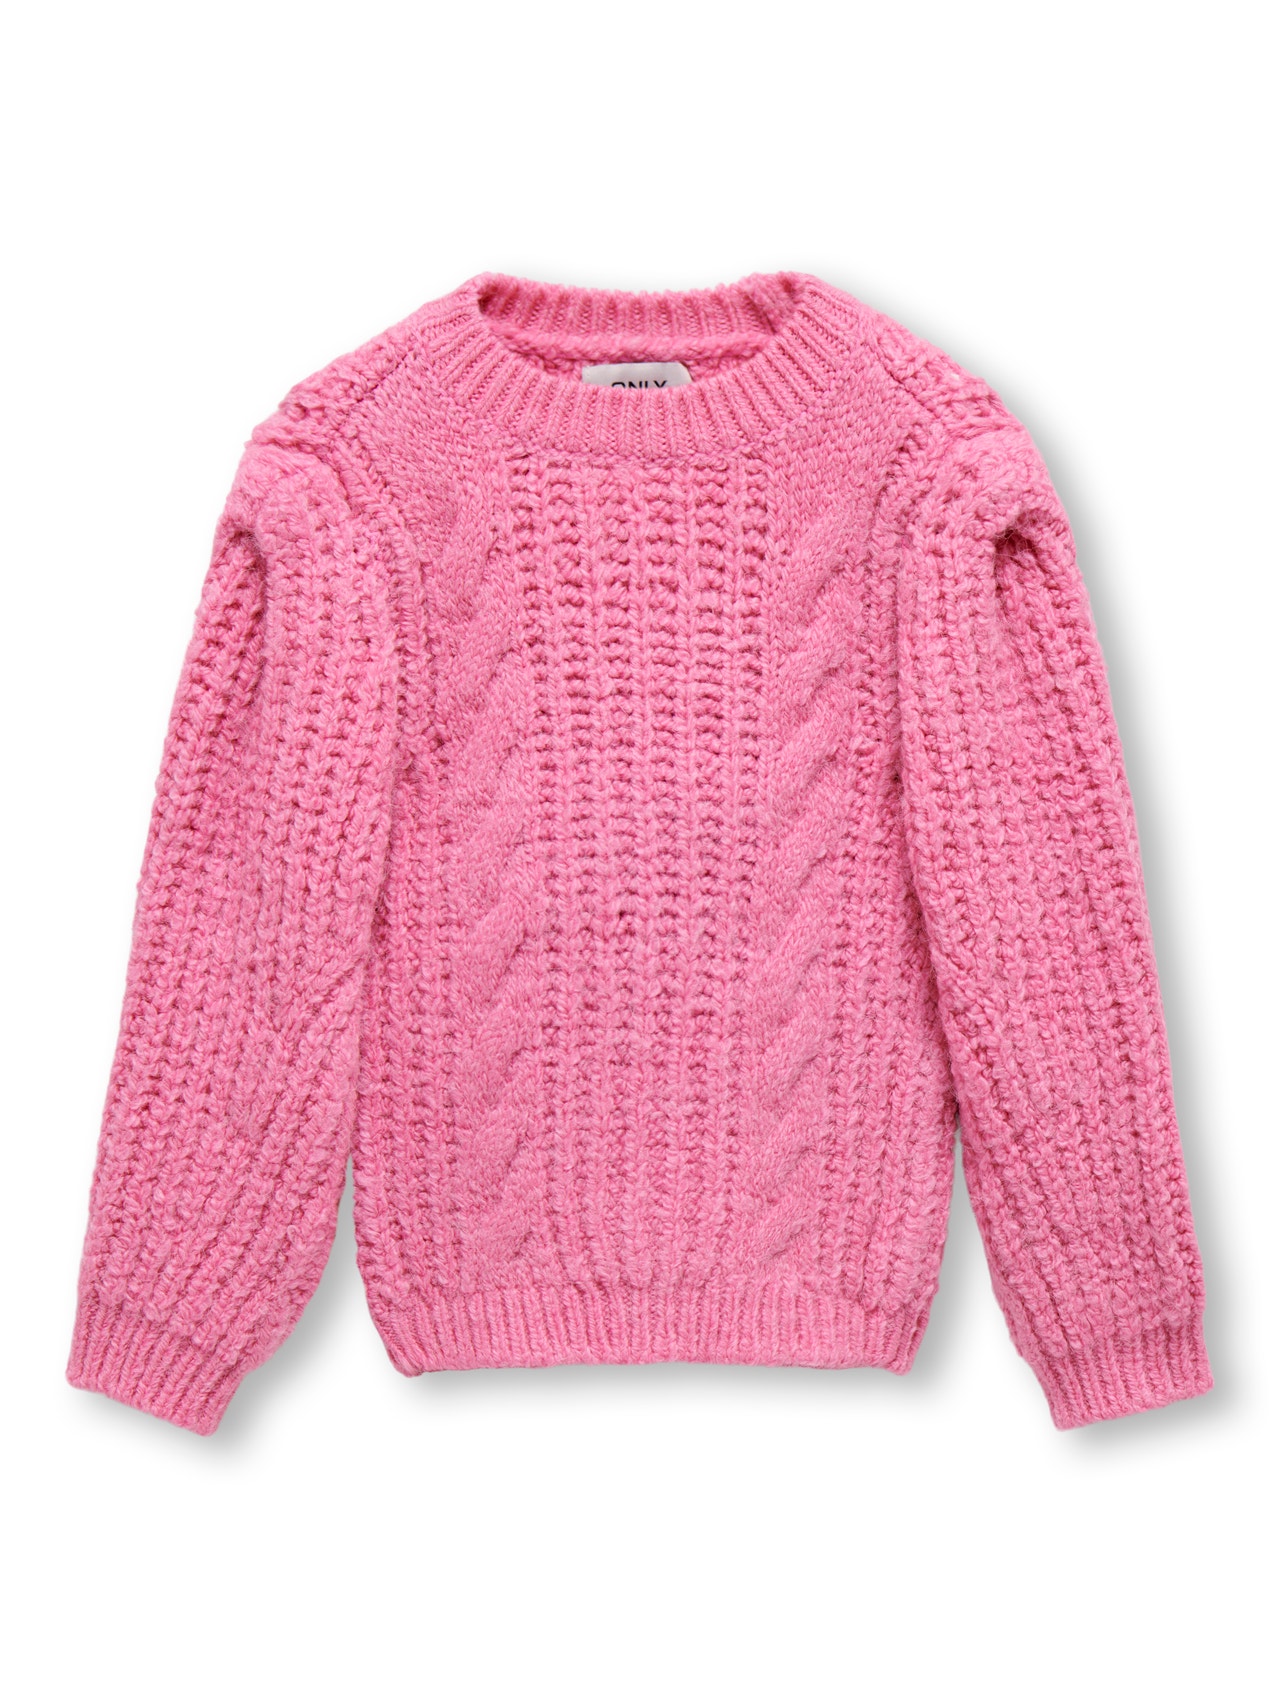 ONLY Mini Chunky Knitted Pullover -Morning Glory - 15273928